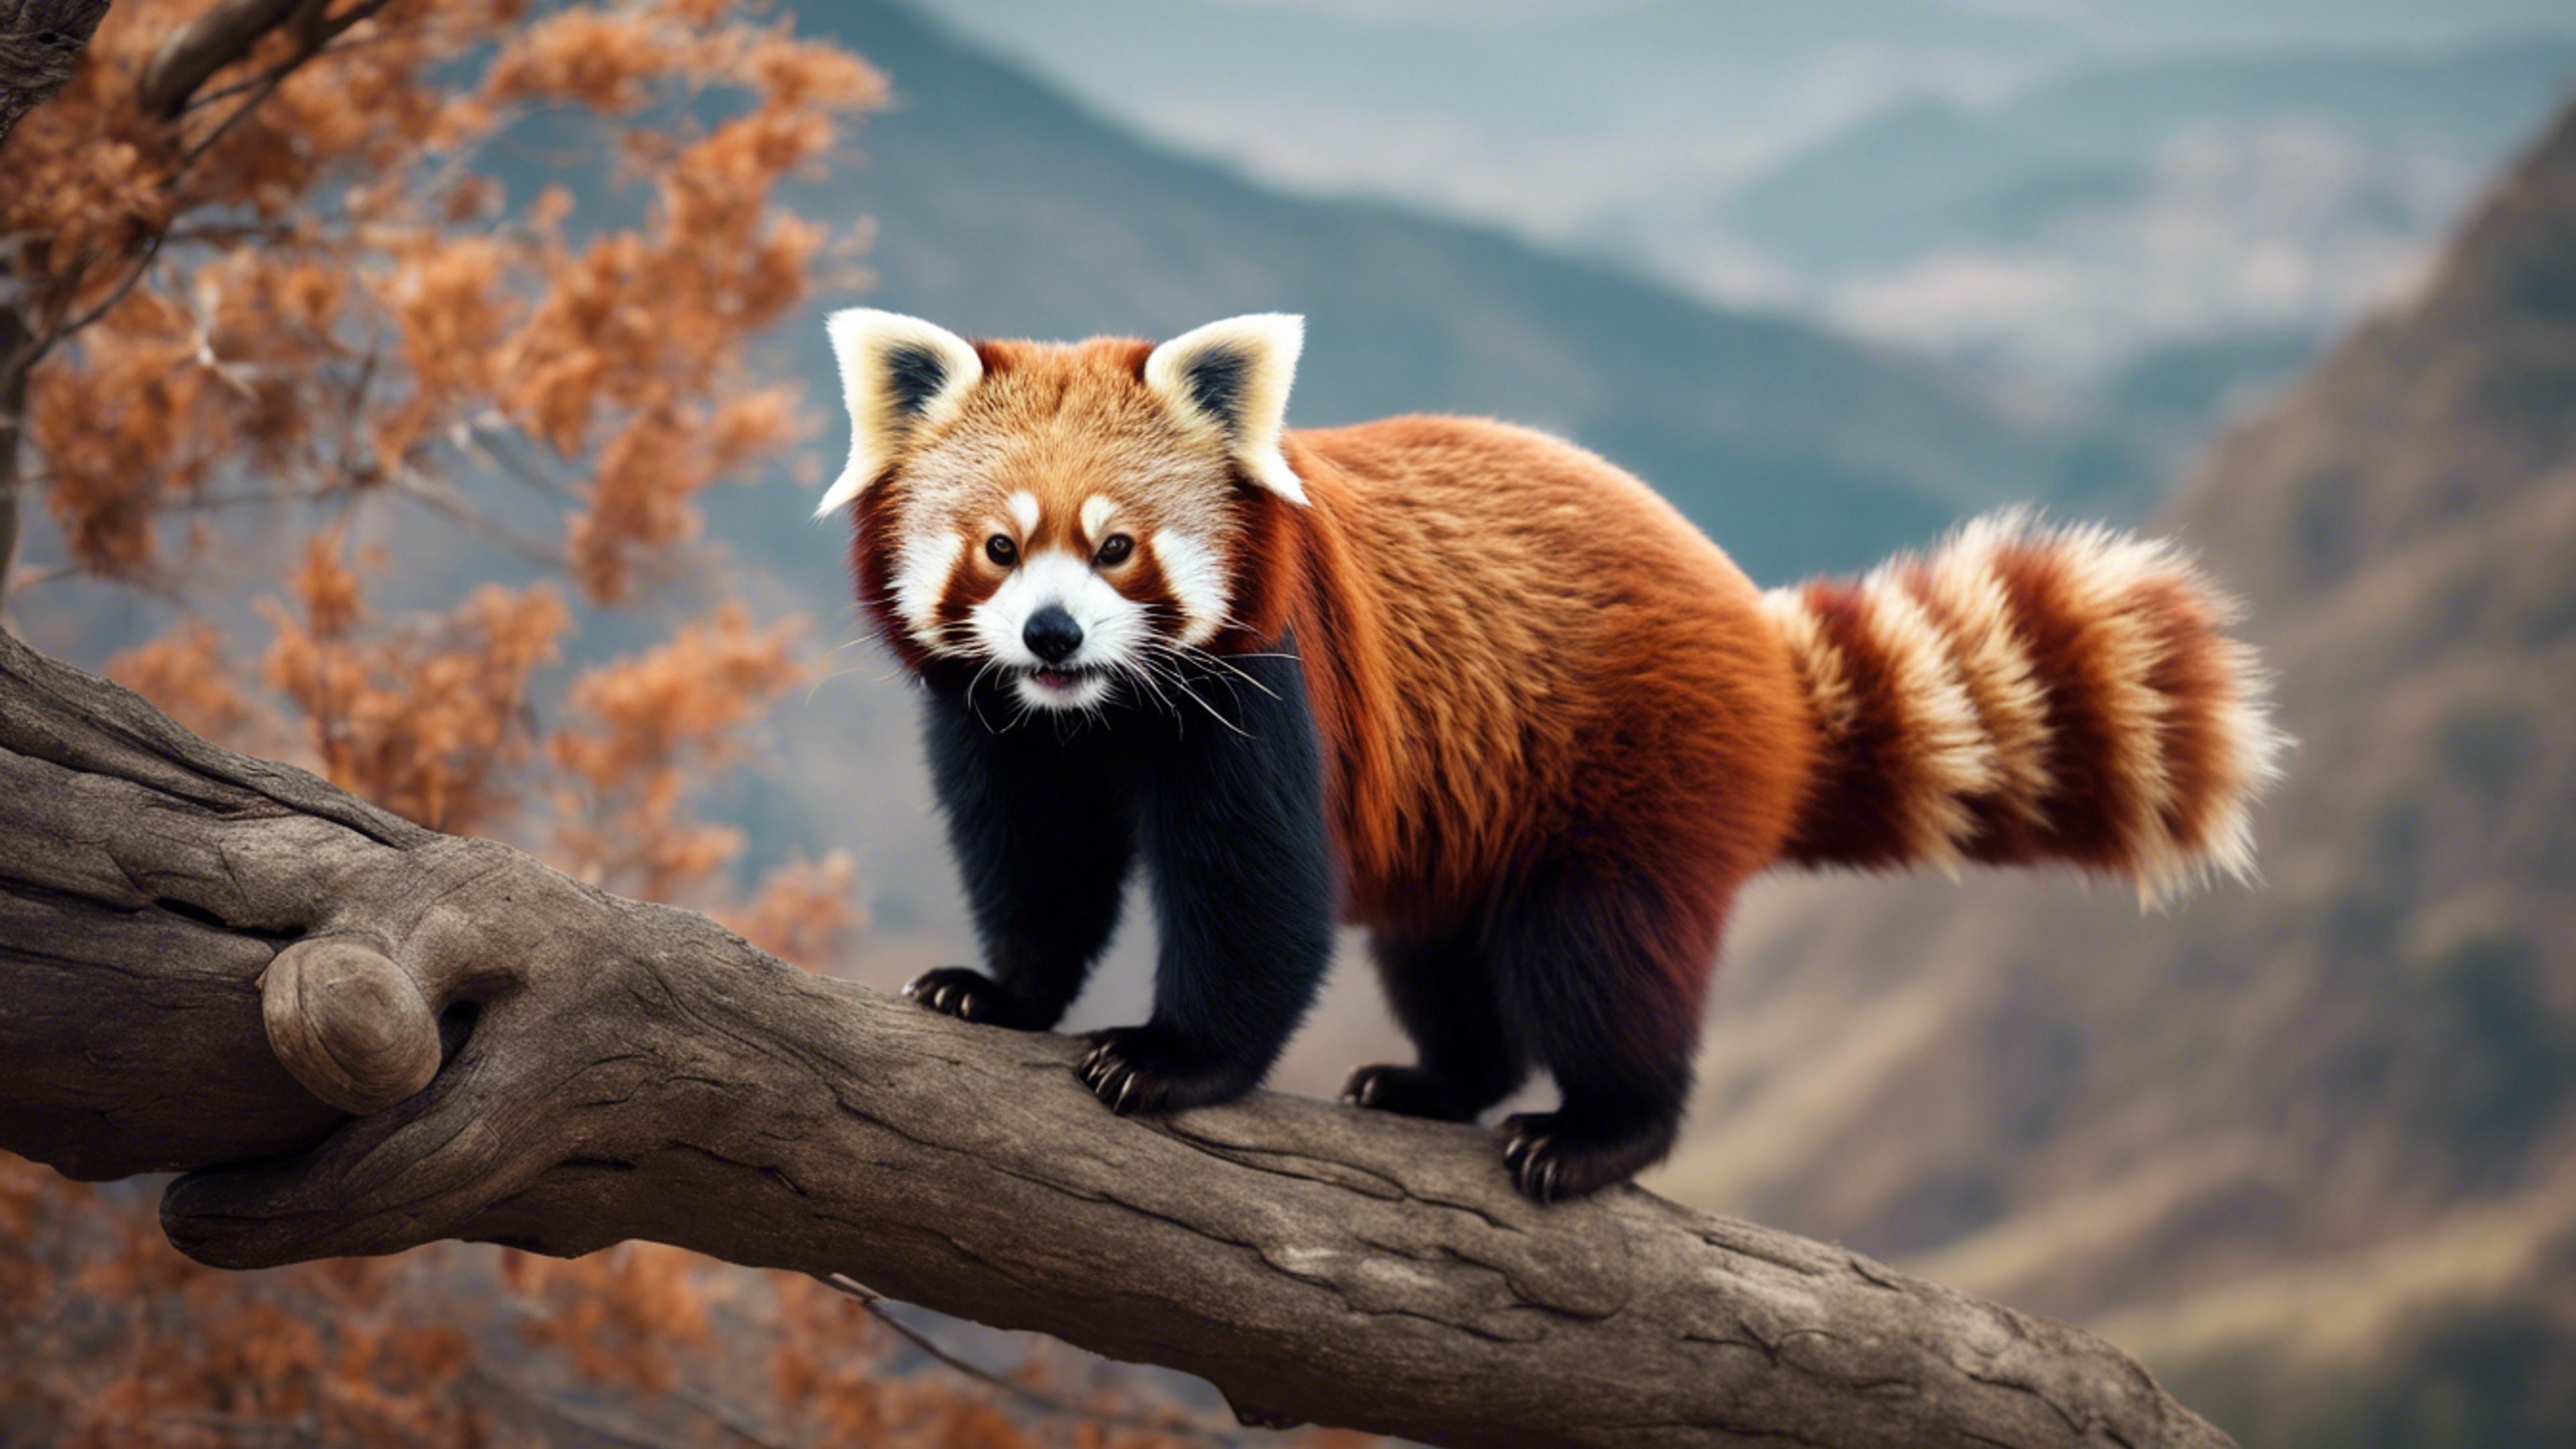 A strong, adult red panda confidently standing on a branch, mountains in the backdrop. Tapet[4b97538c6e5a45e29bab]